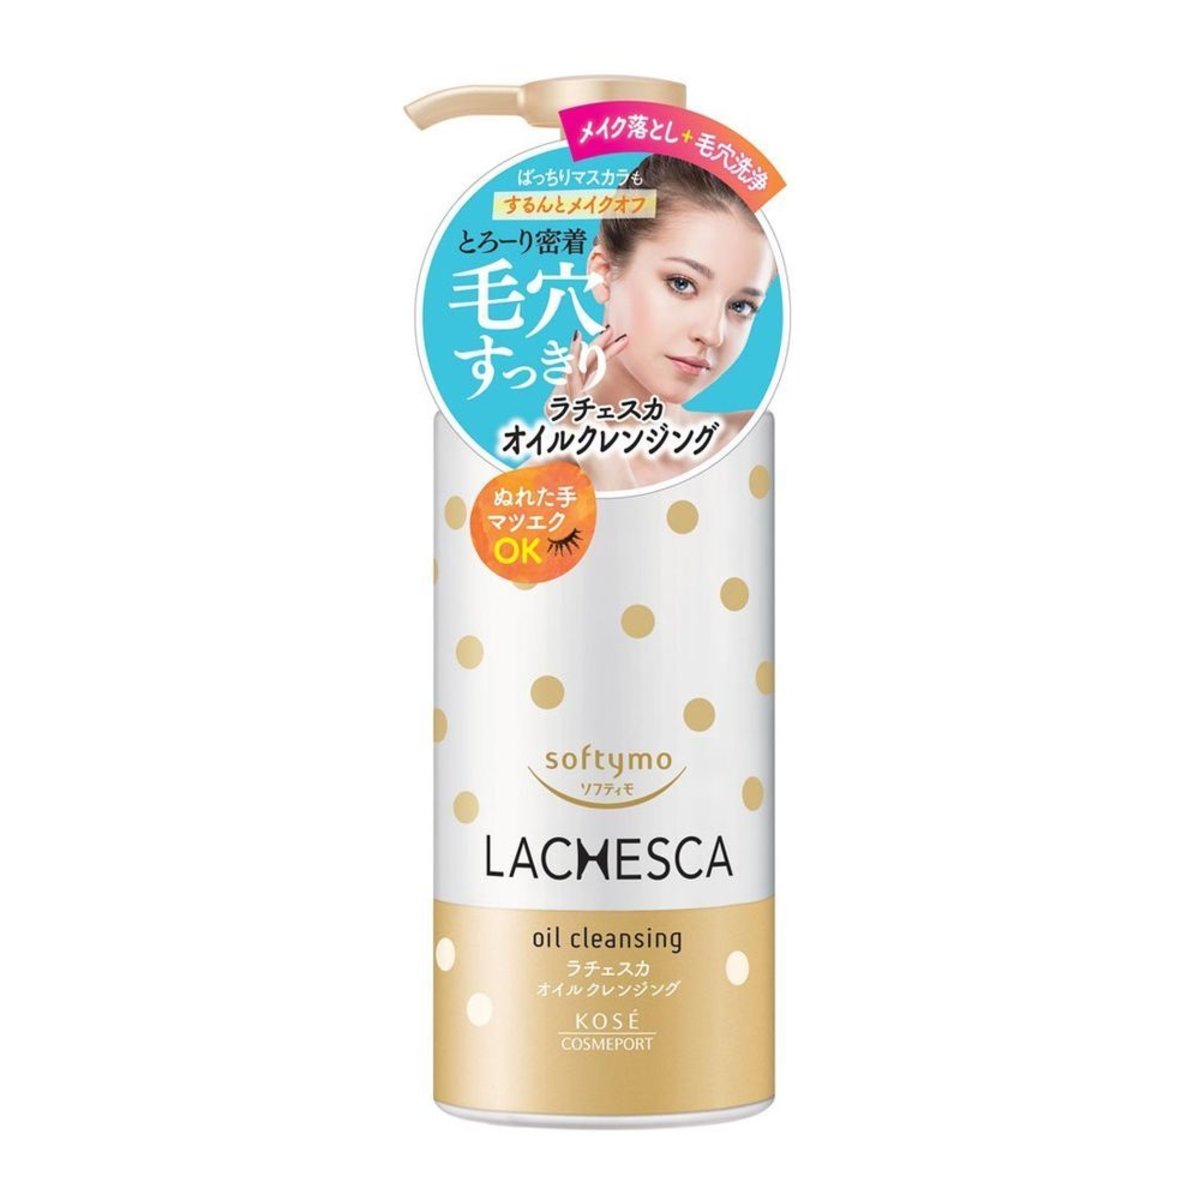 Kose Softymo Lachesca Oil Cleansing